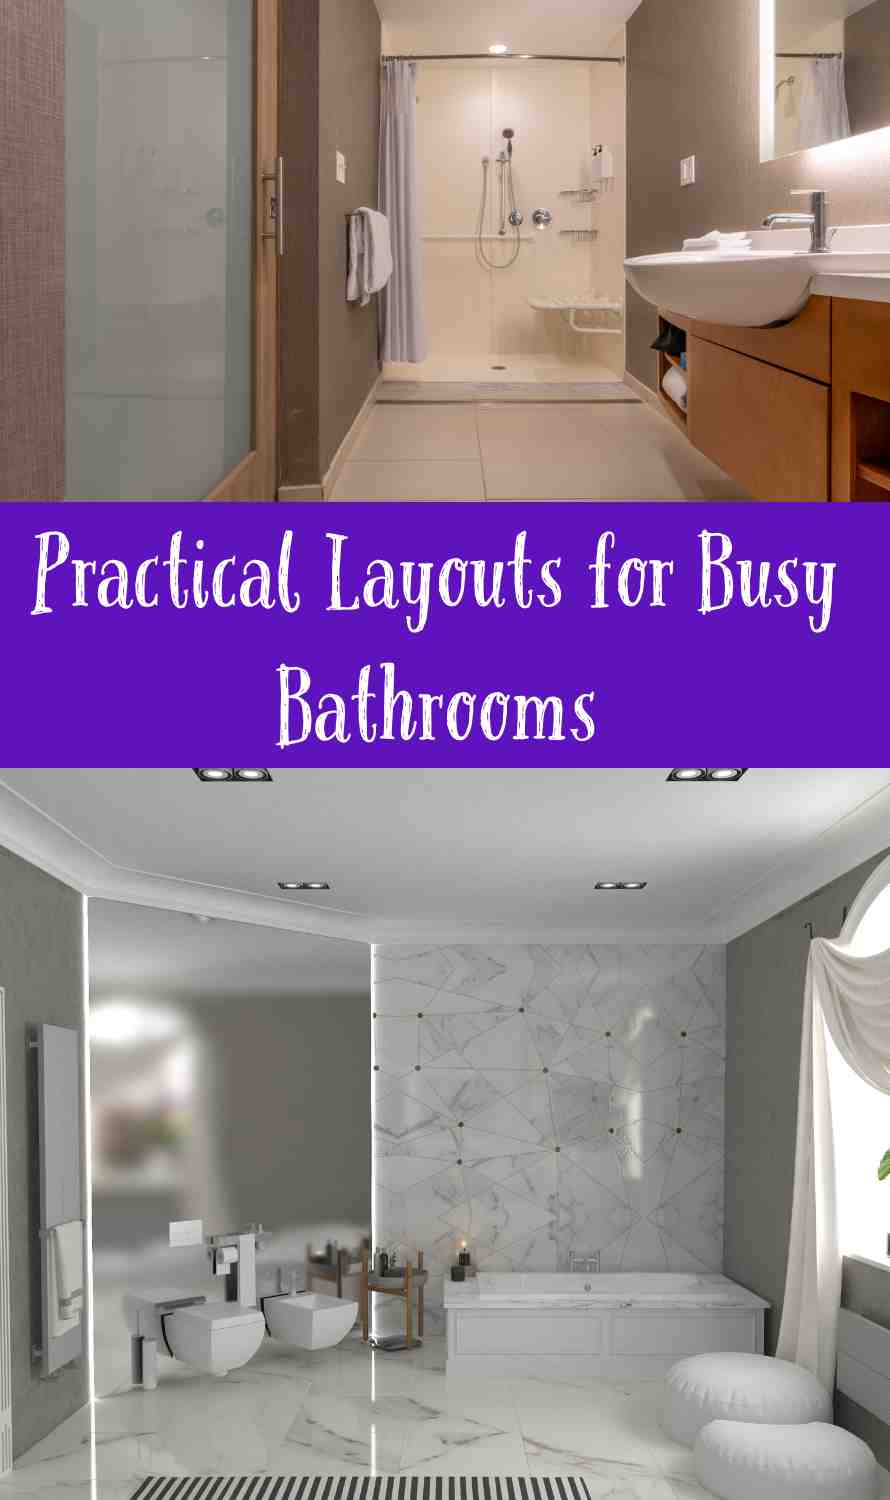 Practical Layouts for Busy Bathrooms